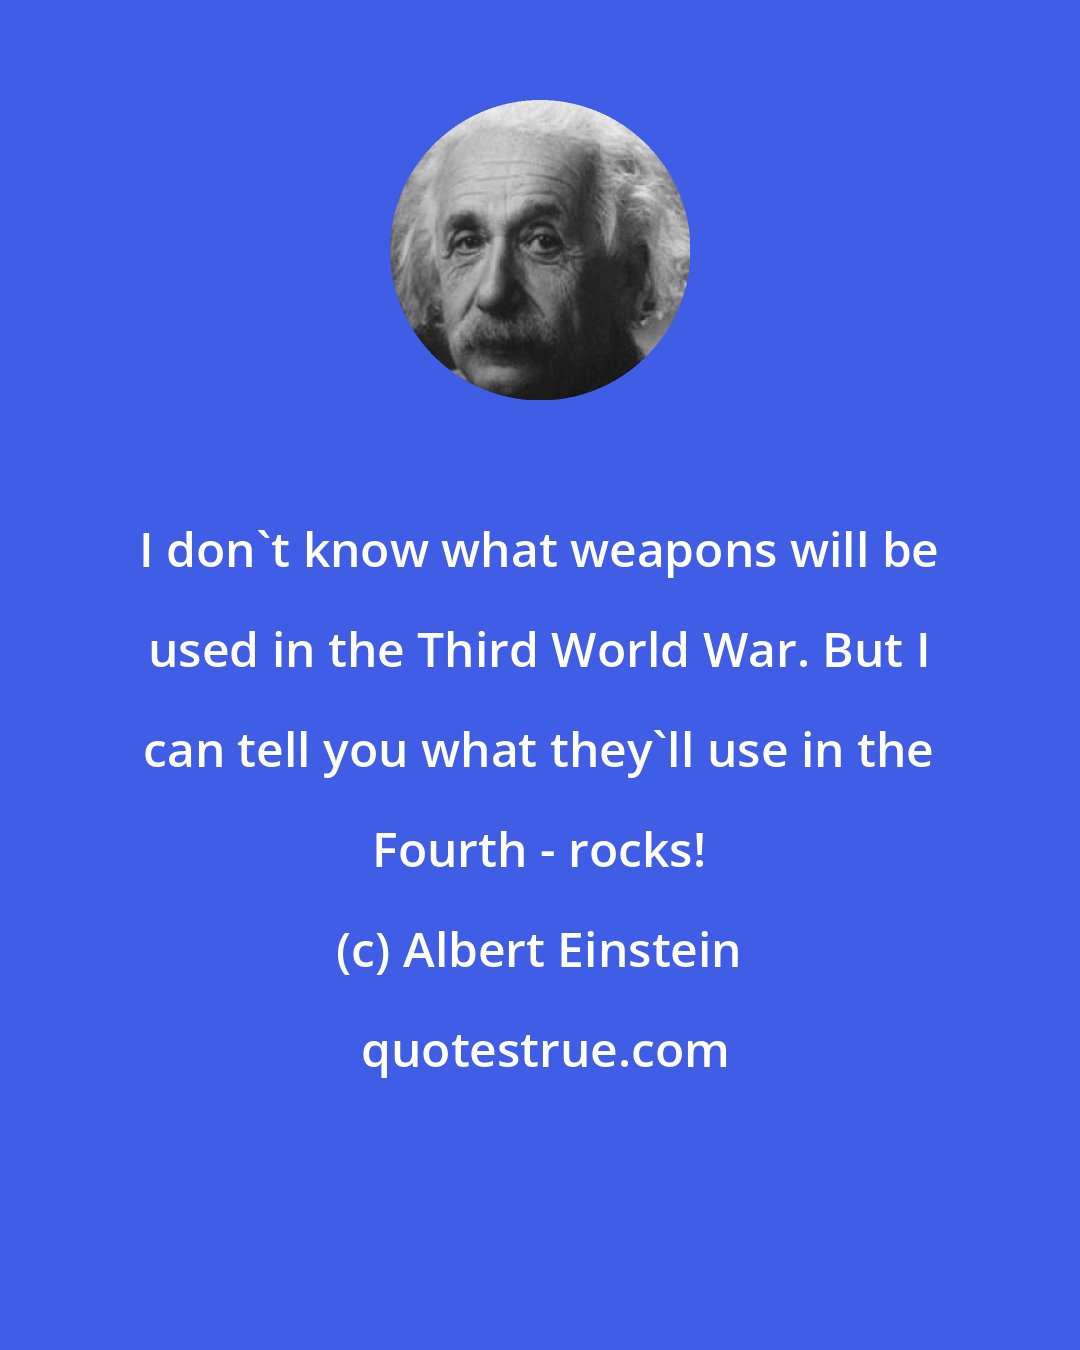 Albert Einstein: I don't know what weapons will be used in the Third World War. But I can tell you what they'll use in the Fourth - rocks!